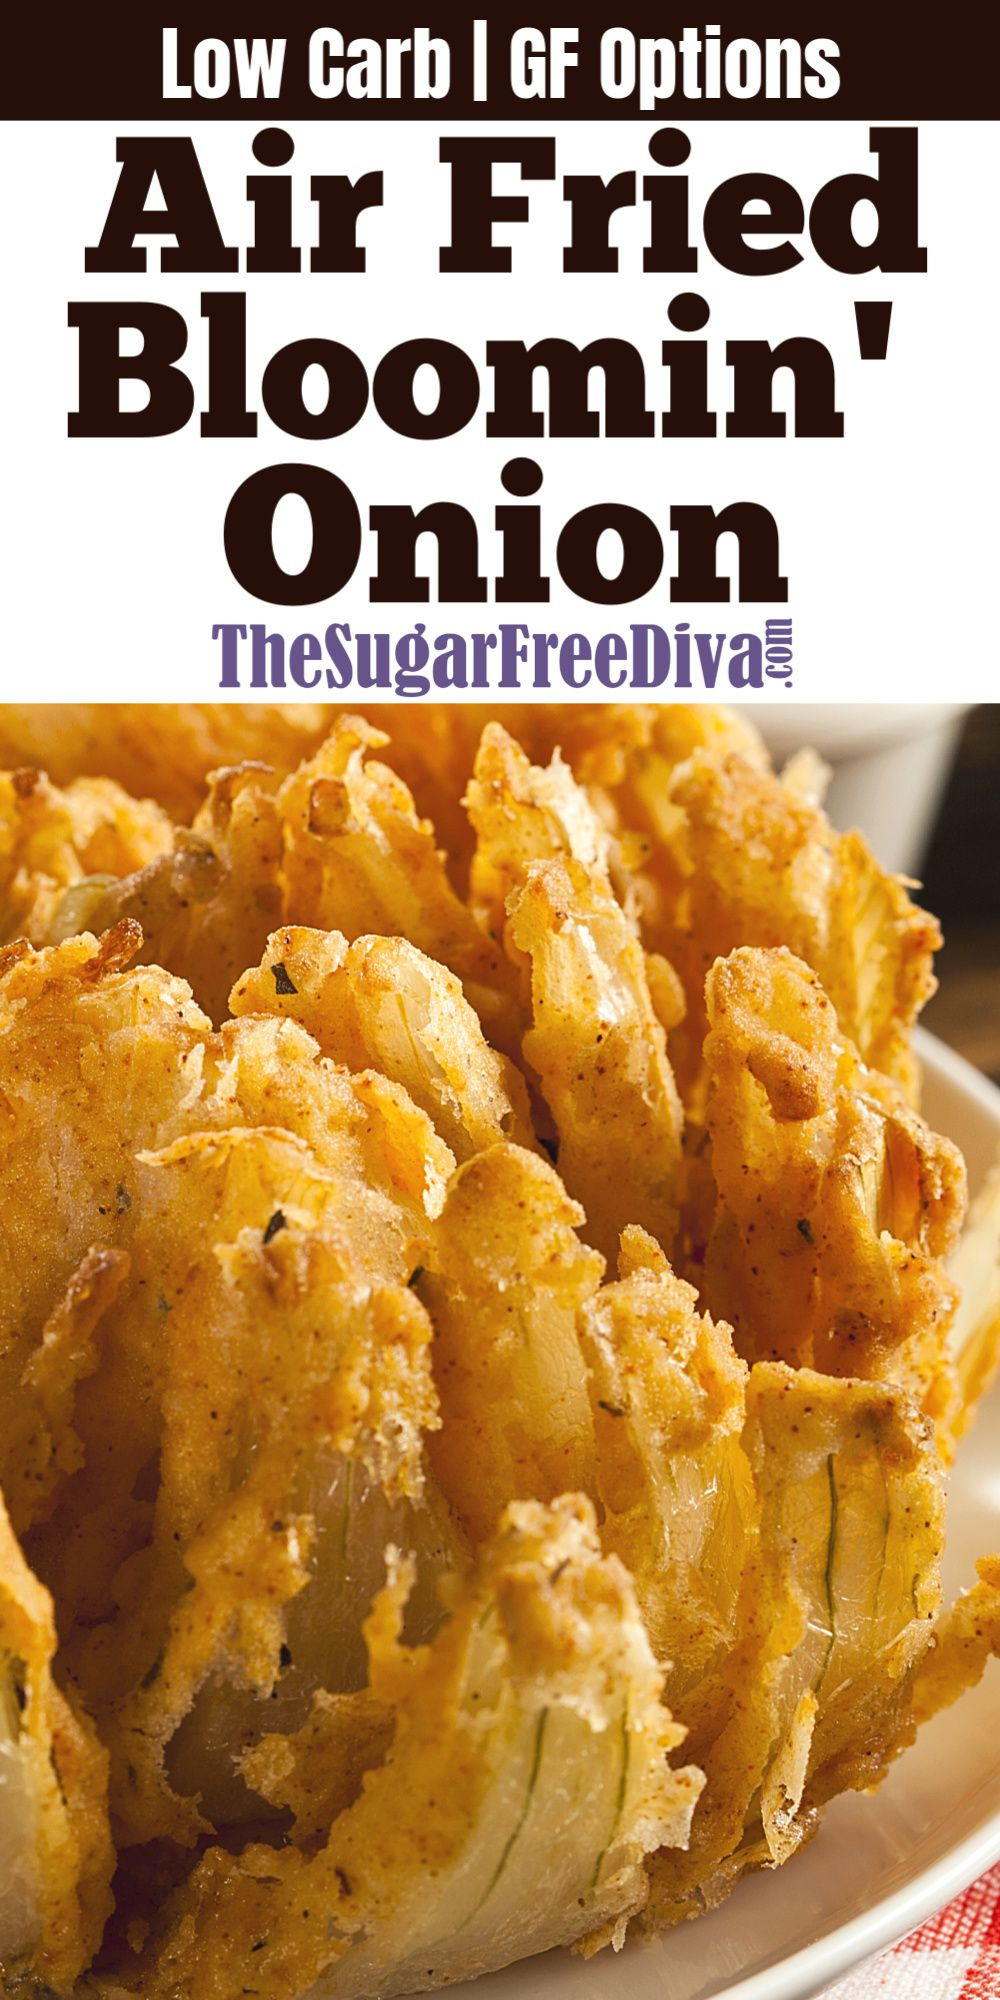 Blooming Onion Recipe Air Fryer Keto
 This Air Fried Blooming ion recipe is a great